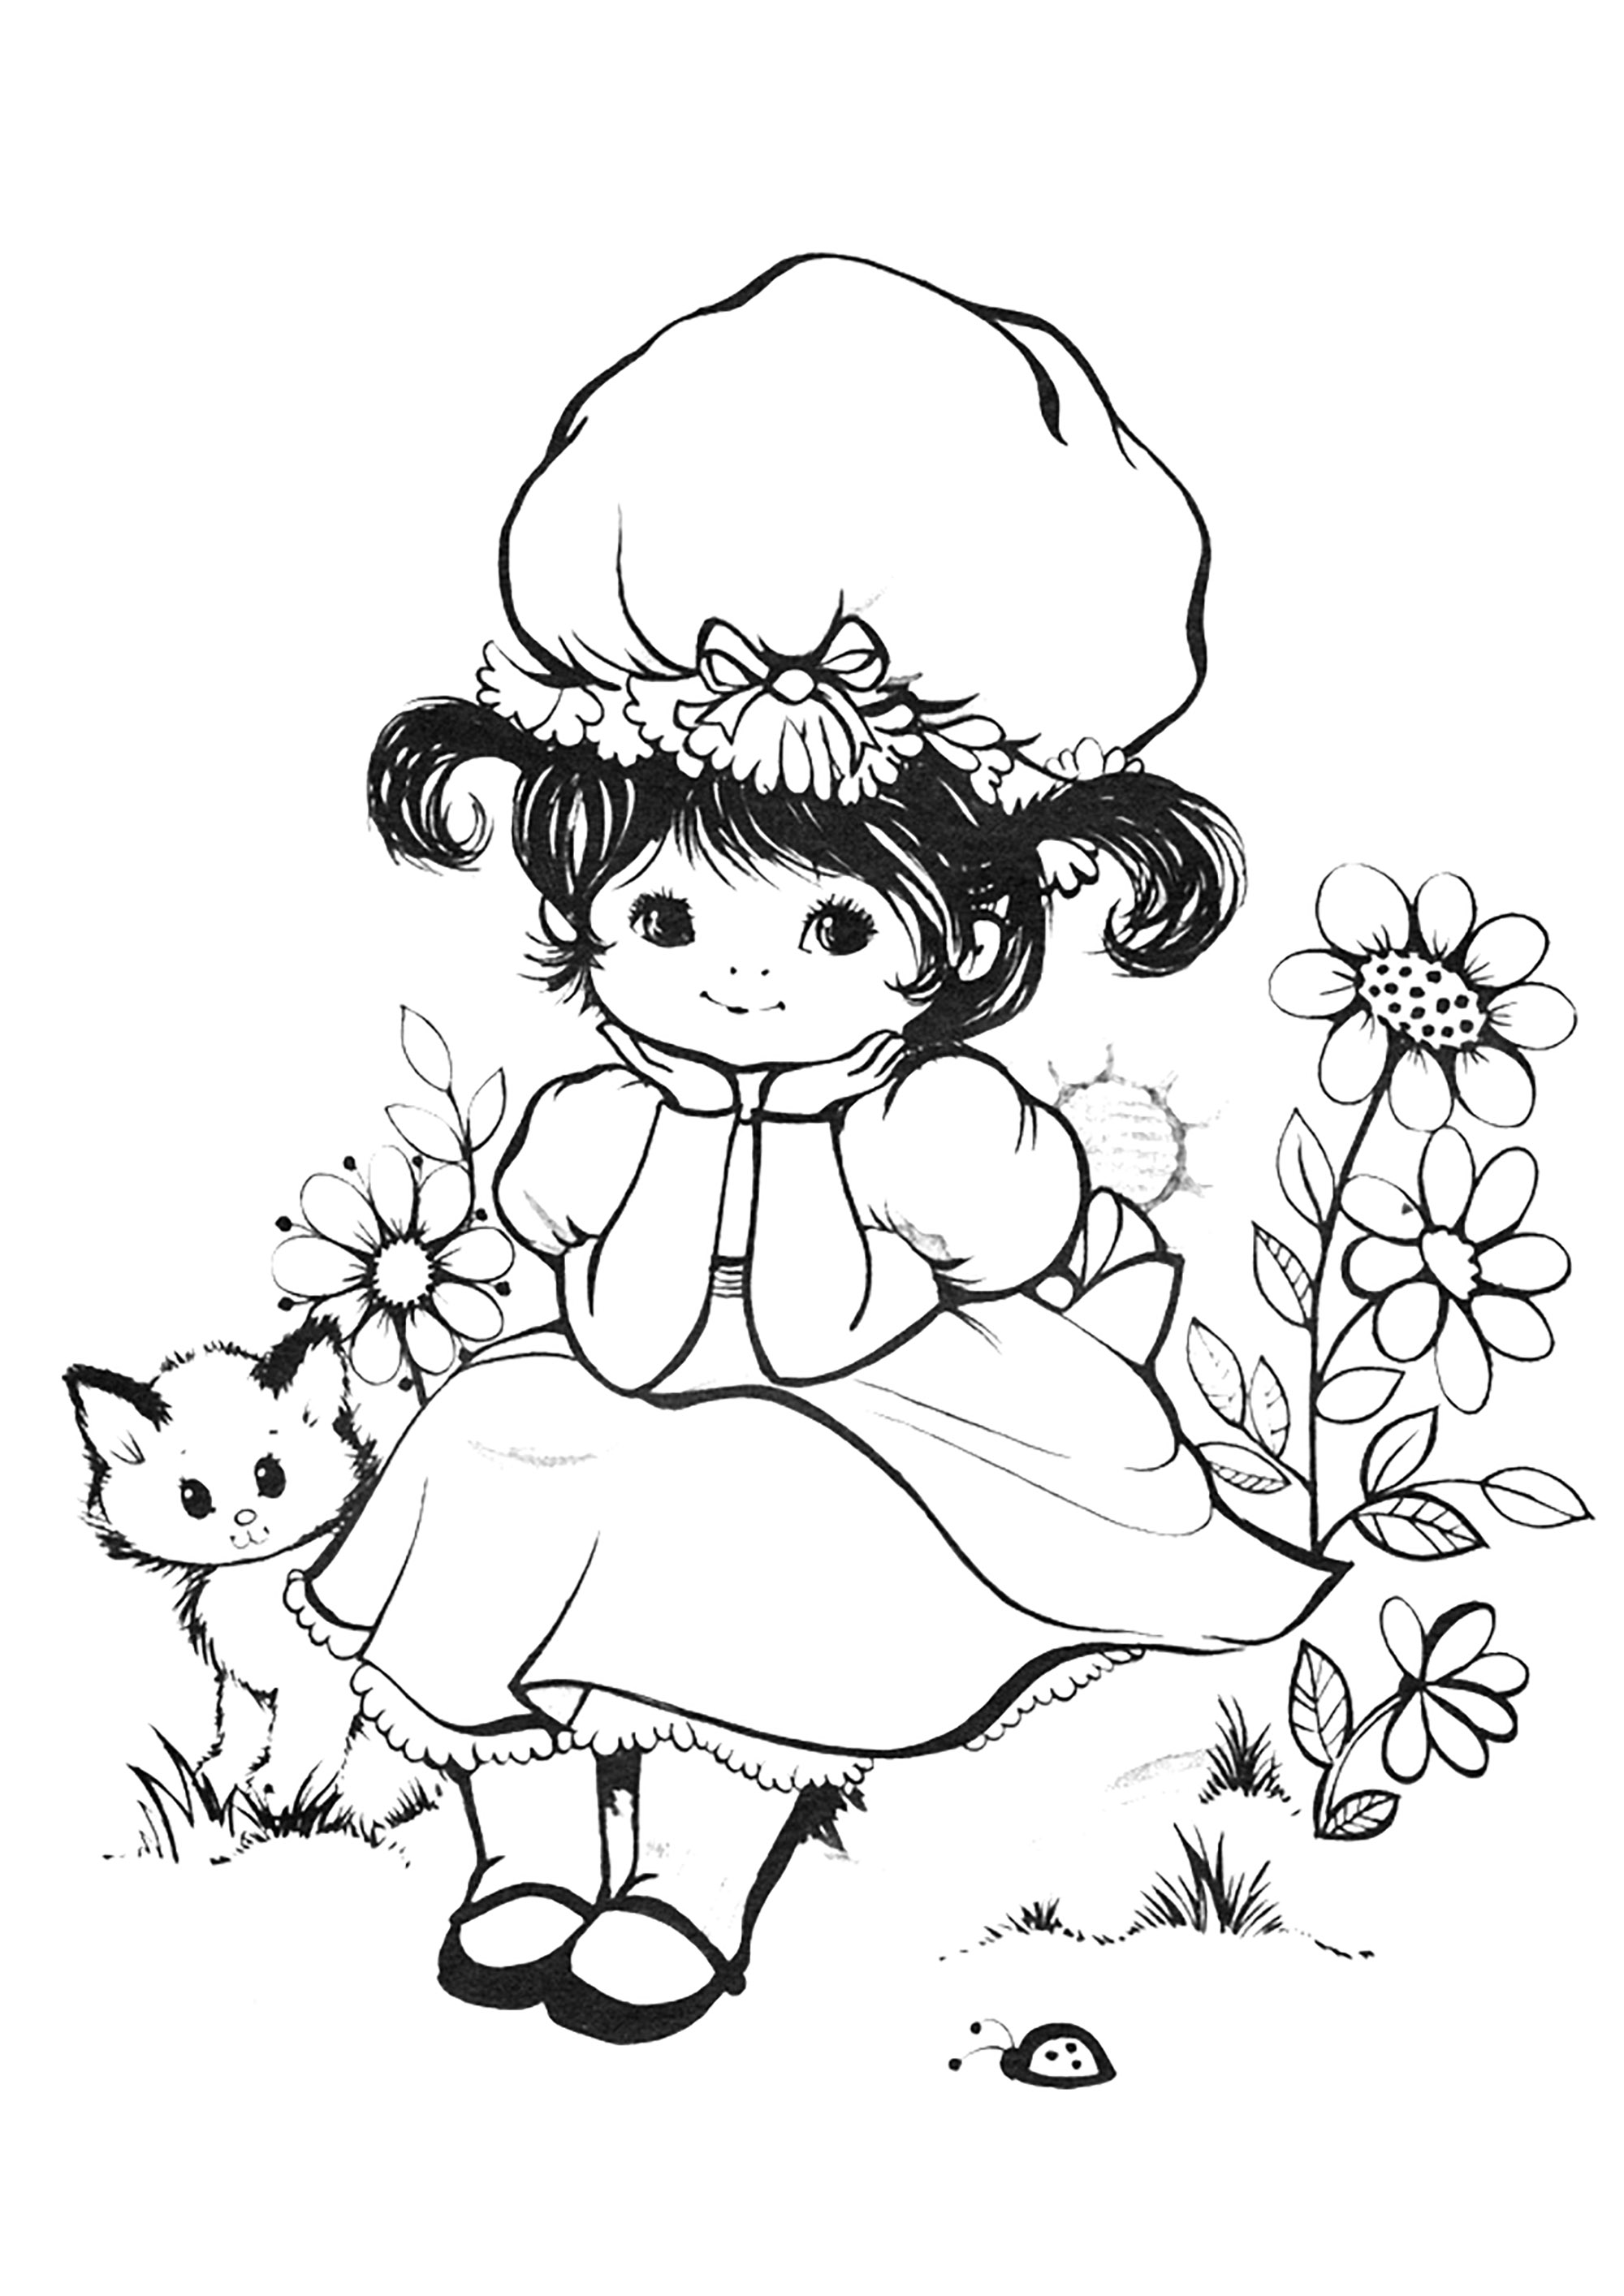 Vintage coloring page of a little girl in the garden with her cat